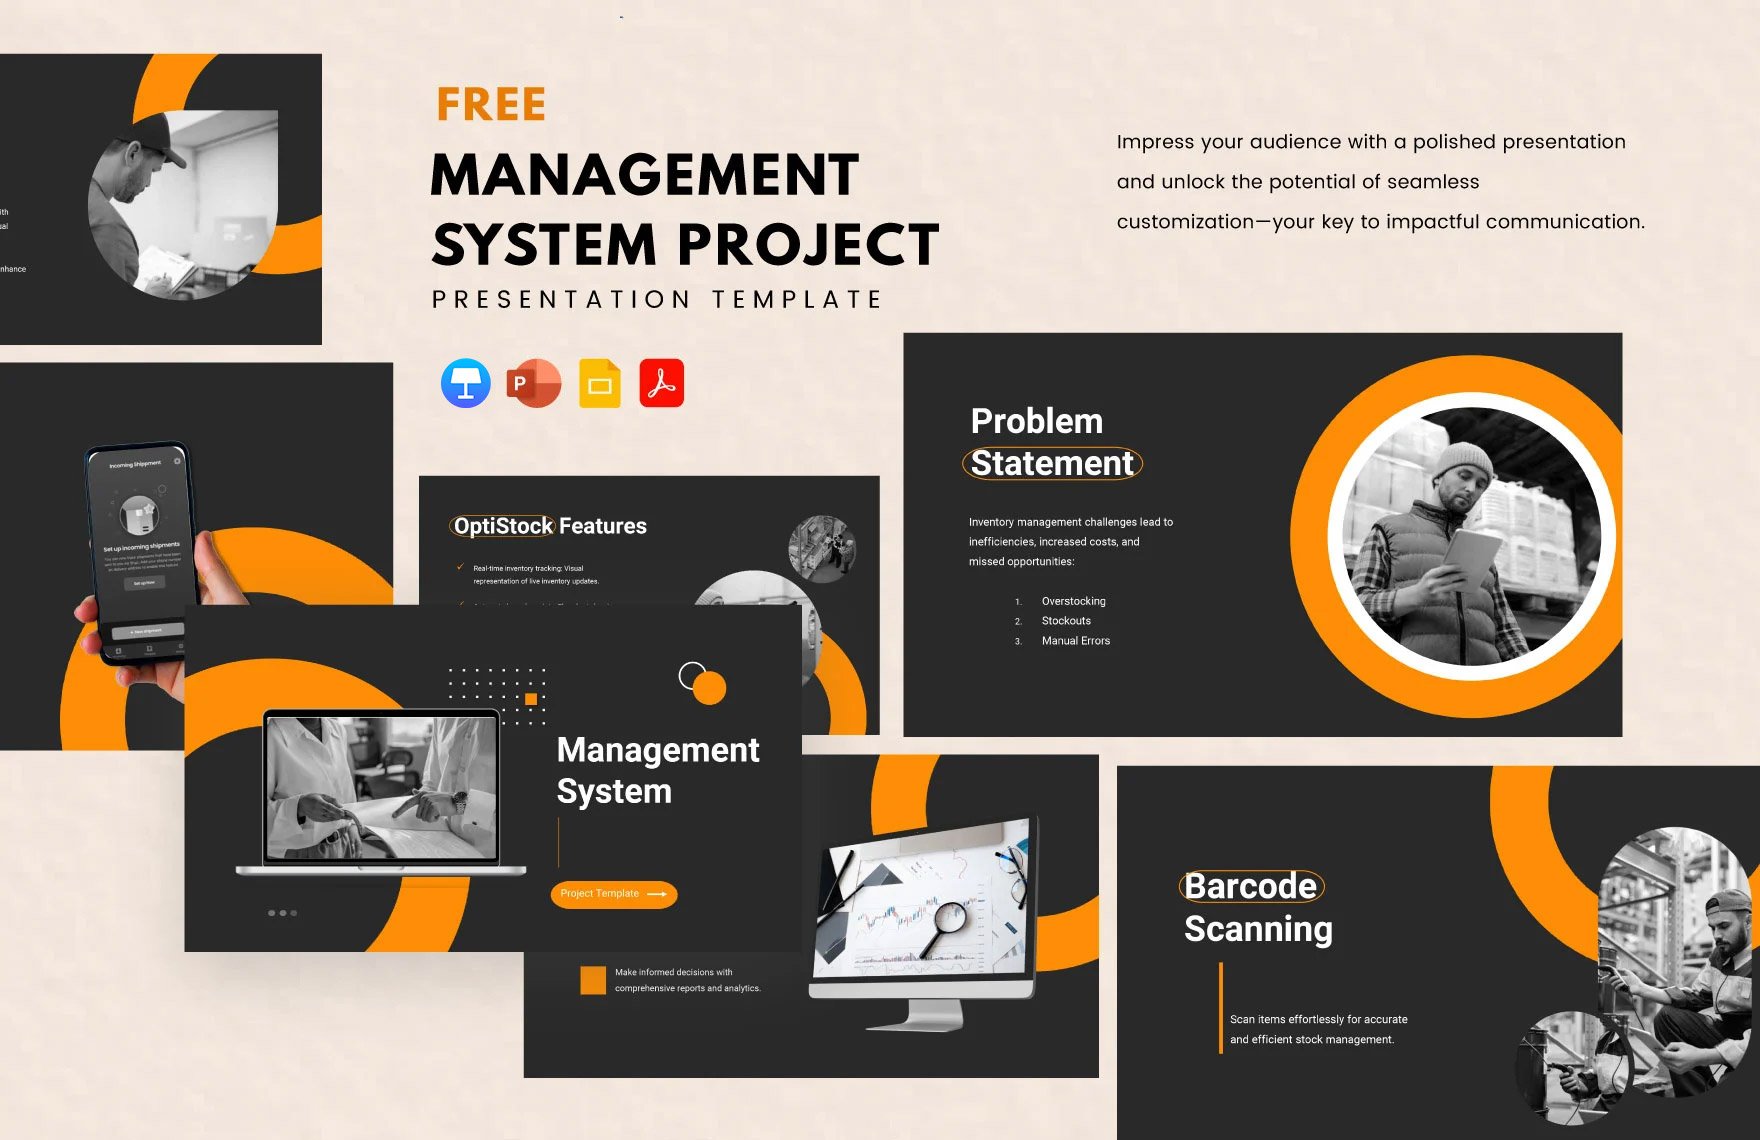 Management System Project Template